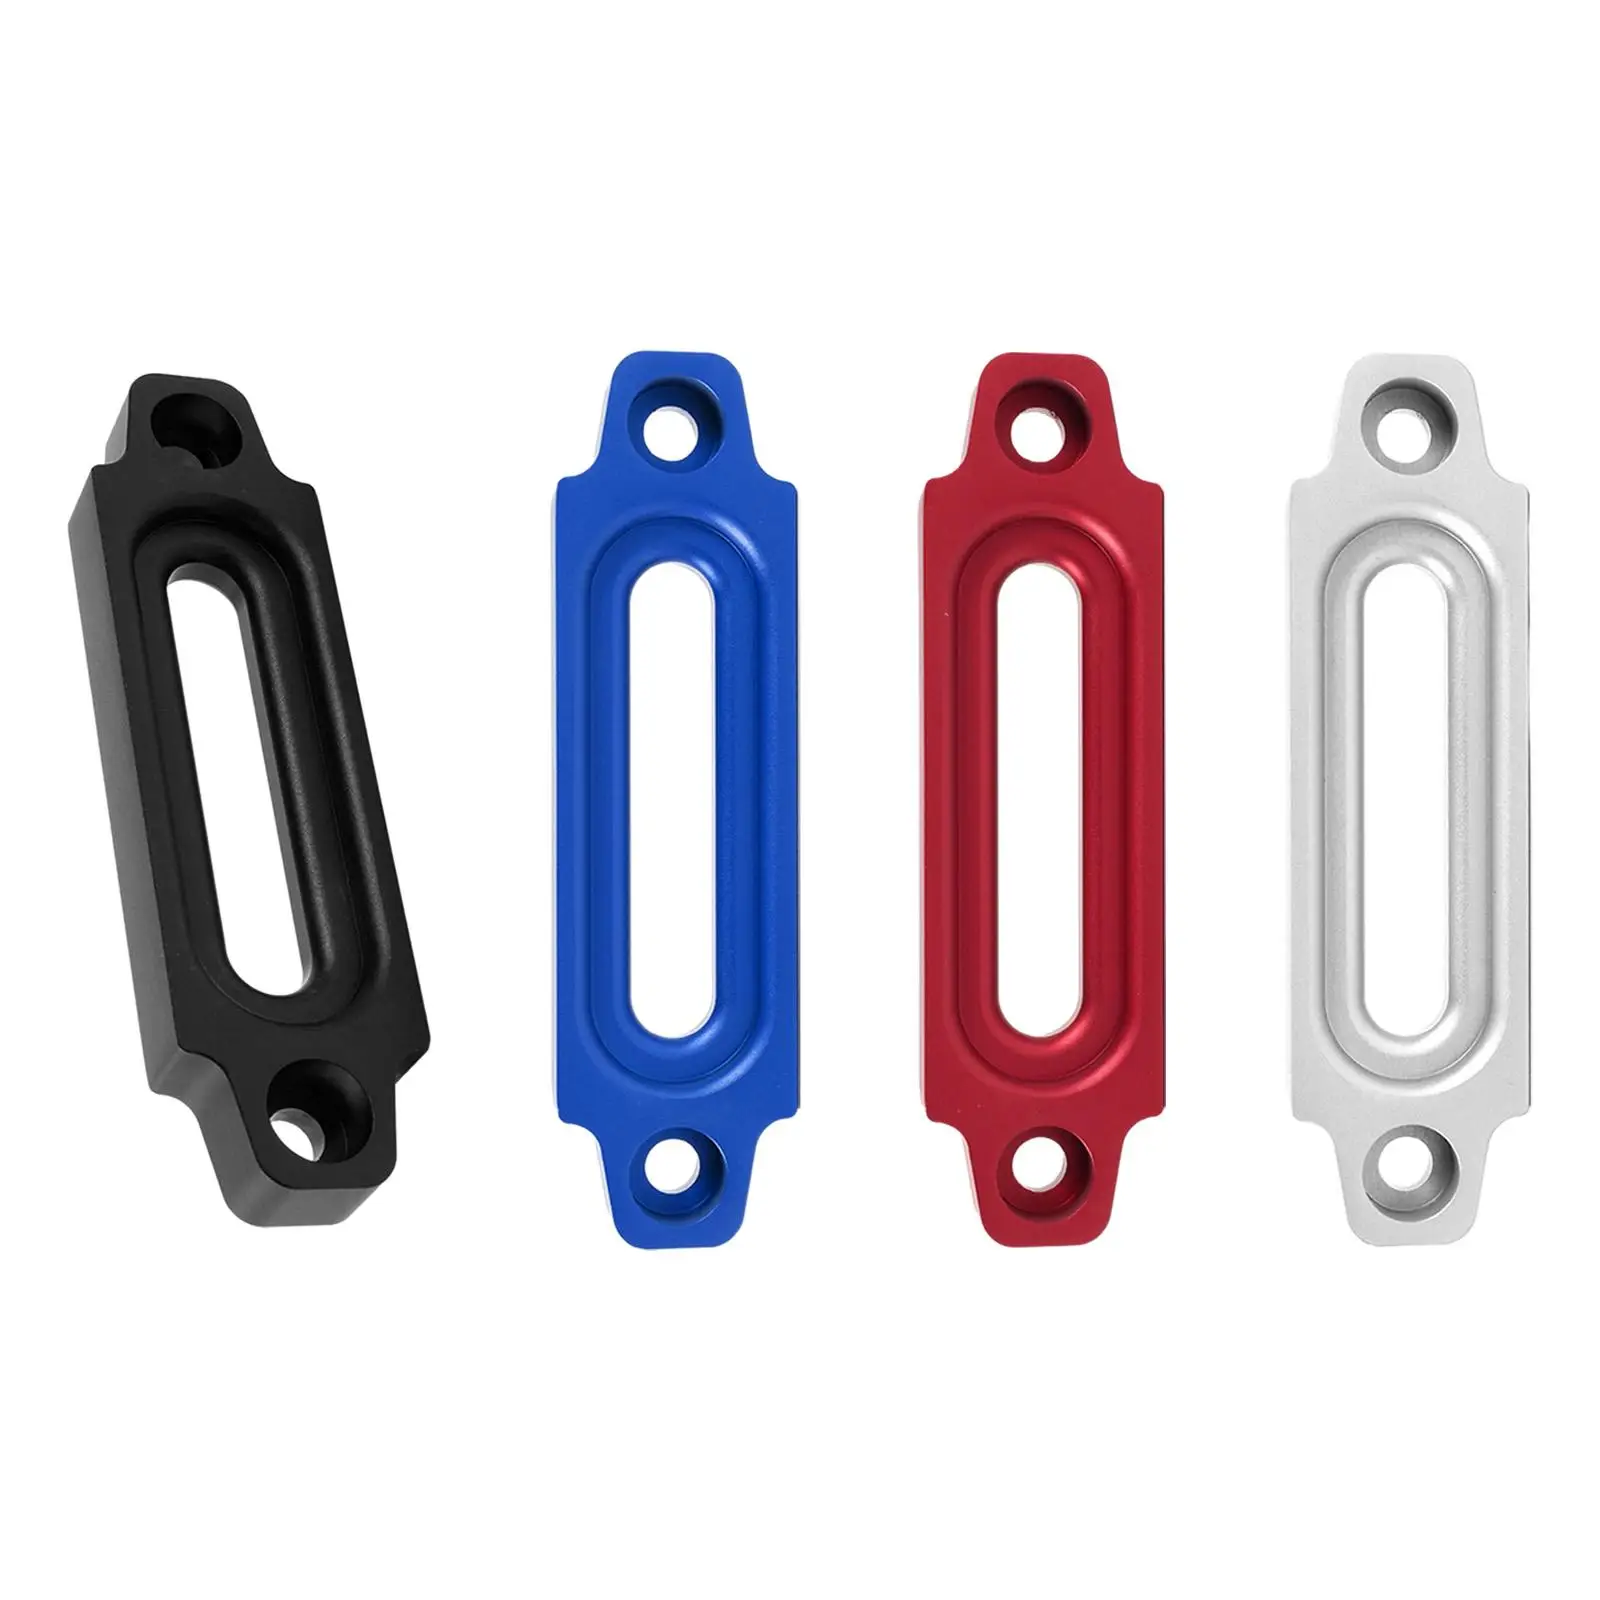 Winch Fairlead Durable Easy to Install Accessories Synthetic Rope Versatile 124mm for Aluminum Suspension Ropes Guide Ropes